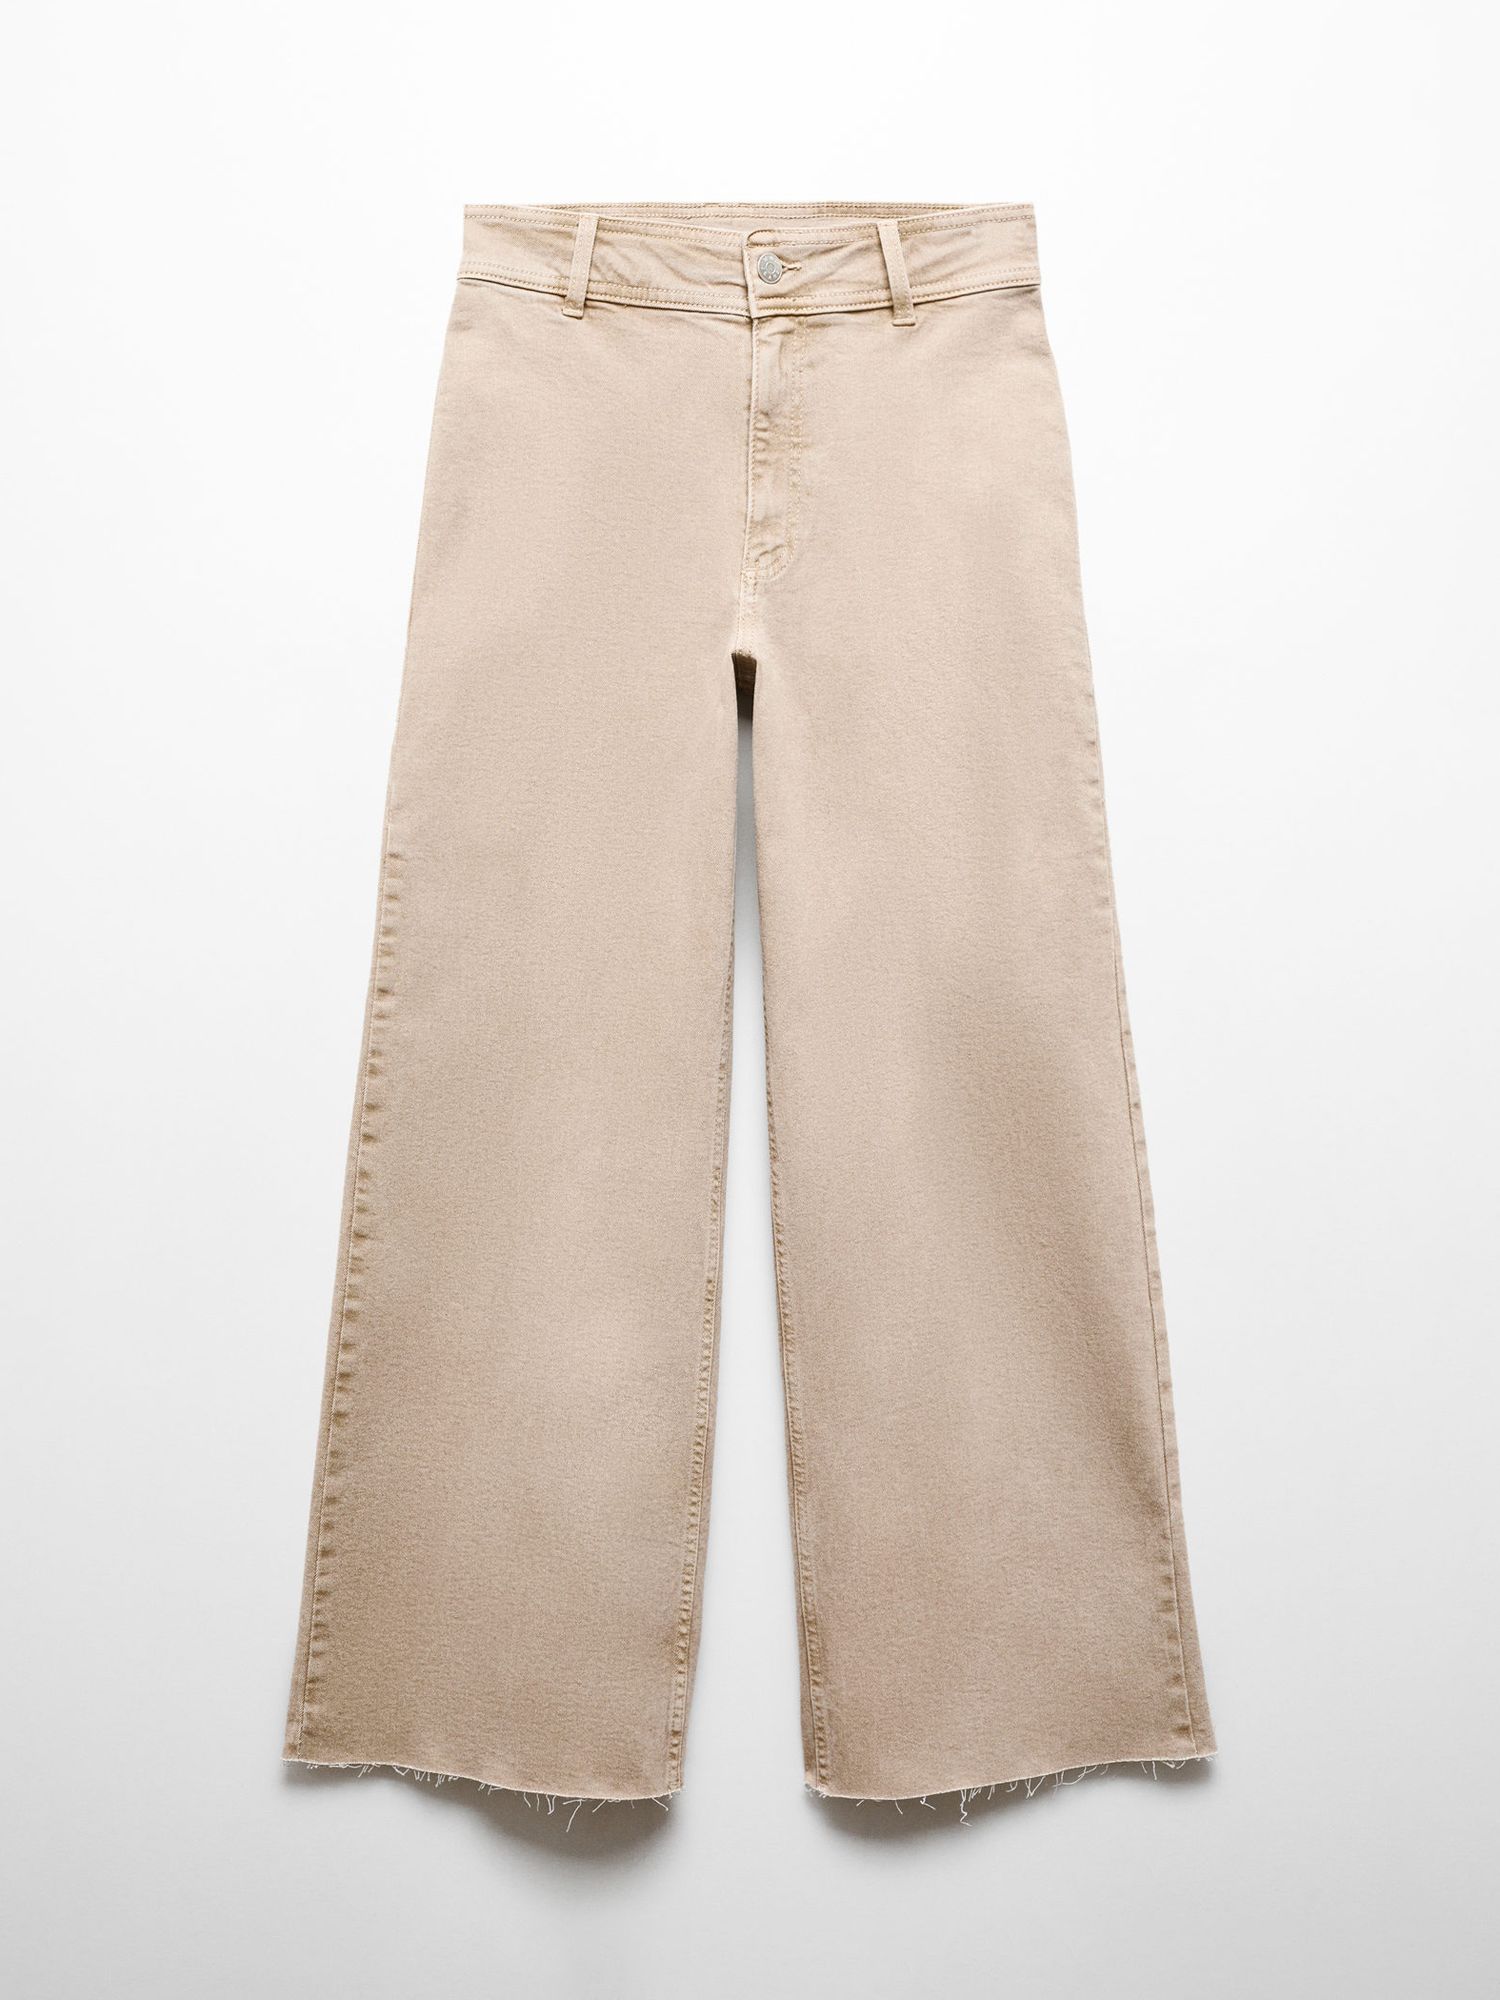 Buy Mango Catherin High Waist Culotte Jeans Online at johnlewis.com